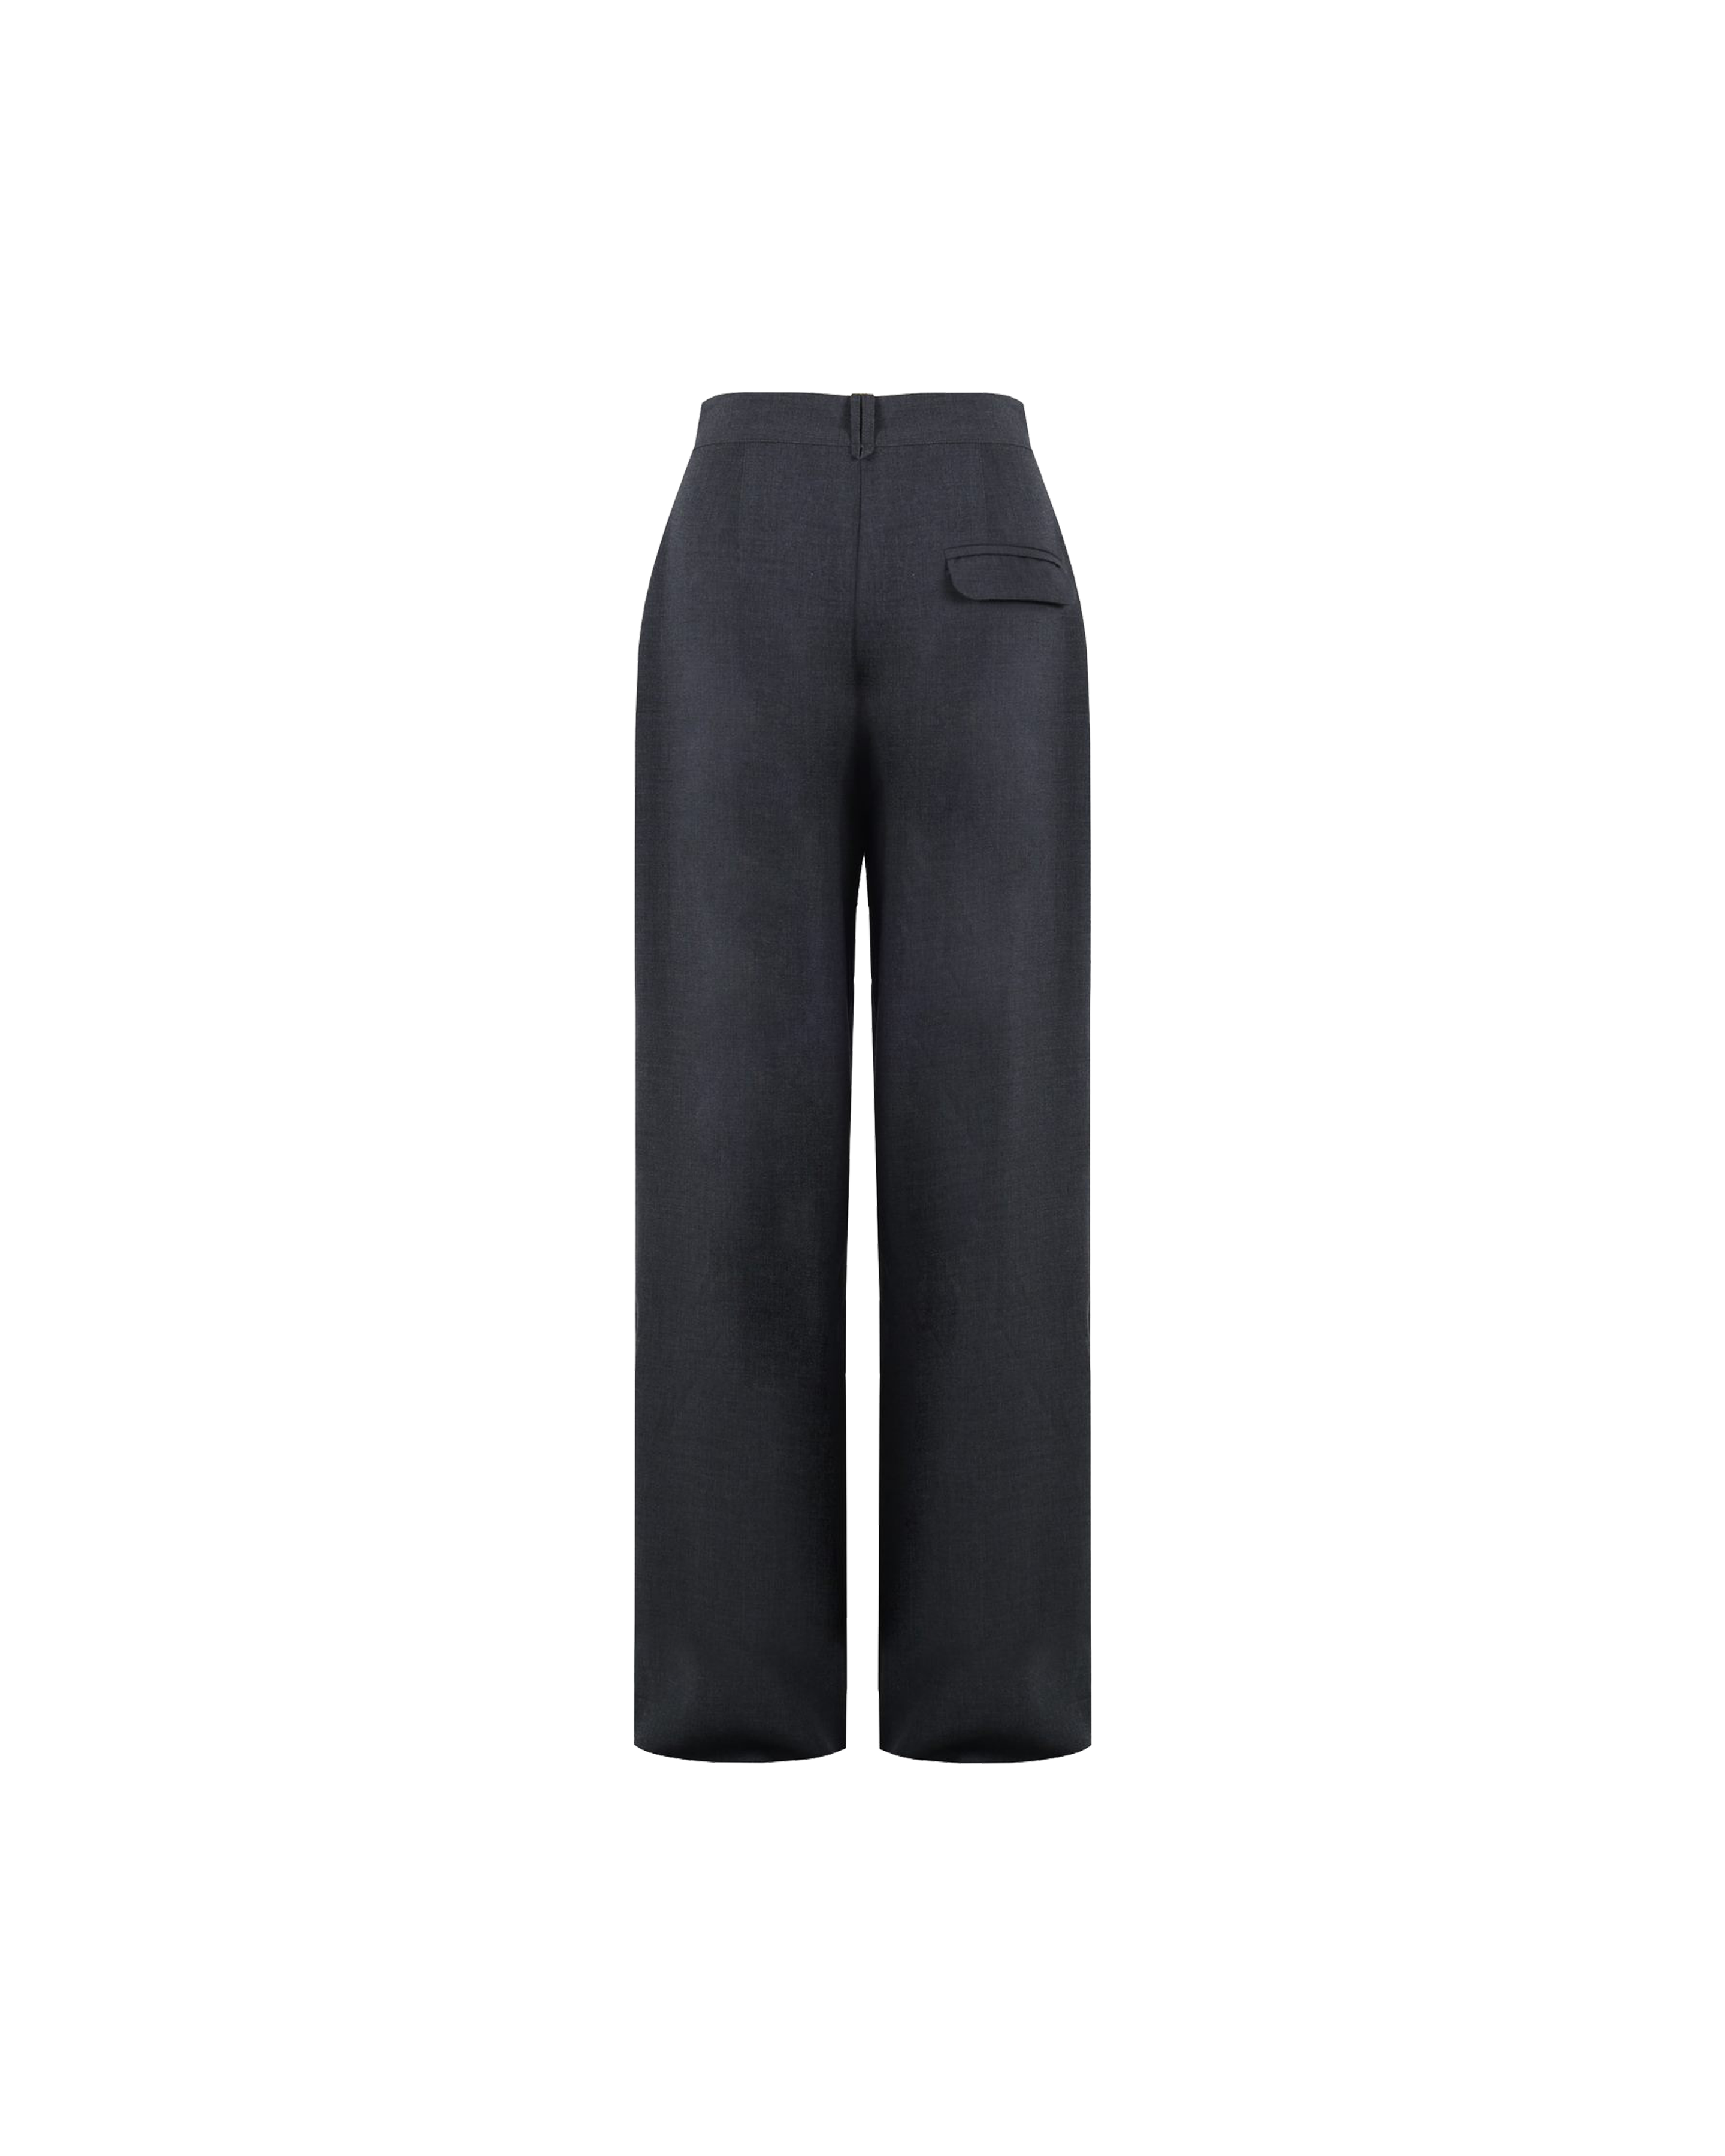 Tall Mens Trousers | Extra Long Trousers | 2tall.com